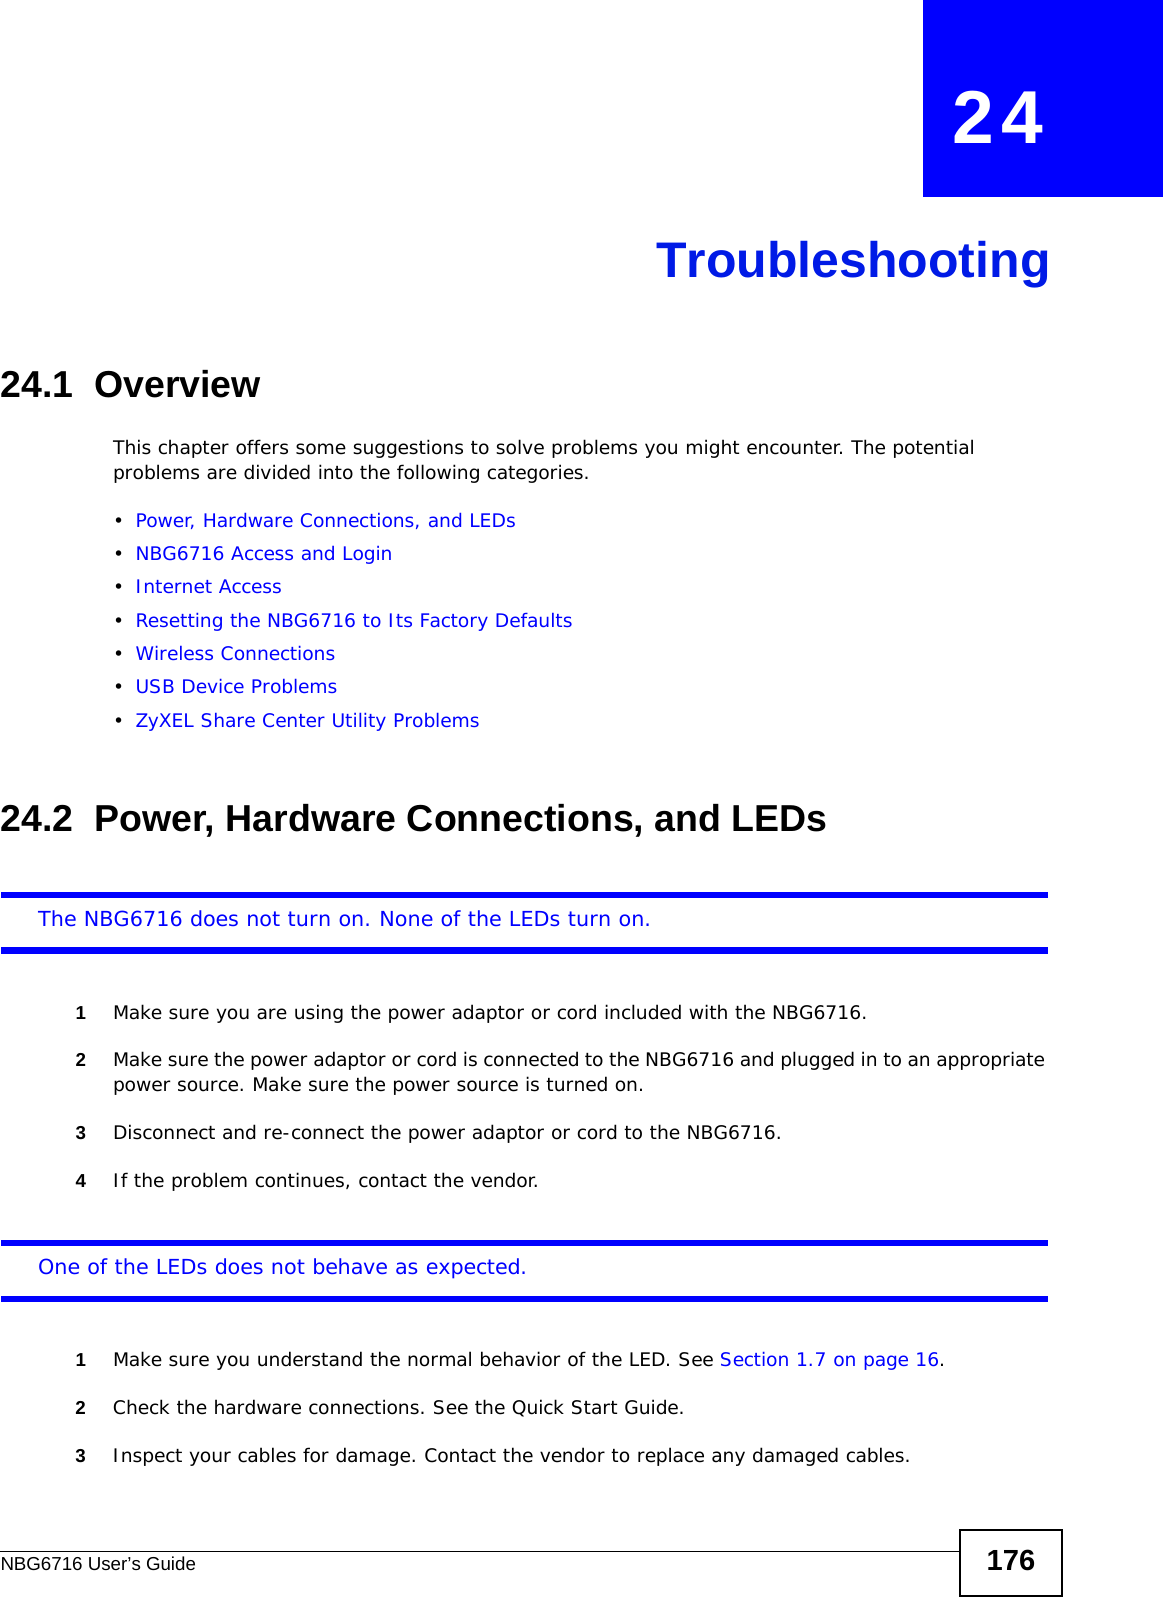 NBG6716 User’s Guide 176CHAPTER   24Troubleshooting24.1  OverviewThis chapter offers some suggestions to solve problems you might encounter. The potential problems are divided into the following categories. •Power, Hardware Connections, and LEDs•NBG6716 Access and Login•Internet Access•Resetting the NBG6716 to Its Factory Defaults•Wireless Connections•USB Device Problems•ZyXEL Share Center Utility Problems24.2  Power, Hardware Connections, and LEDsThe NBG6716 does not turn on. None of the LEDs turn on.1Make sure you are using the power adaptor or cord included with the NBG6716.2Make sure the power adaptor or cord is connected to the NBG6716 and plugged in to an appropriate power source. Make sure the power source is turned on.3Disconnect and re-connect the power adaptor or cord to the NBG6716.4If the problem continues, contact the vendor.One of the LEDs does not behave as expected.1Make sure you understand the normal behavior of the LED. See Section 1.7 on page 16.2Check the hardware connections. See the Quick Start Guide. 3Inspect your cables for damage. Contact the vendor to replace any damaged cables.